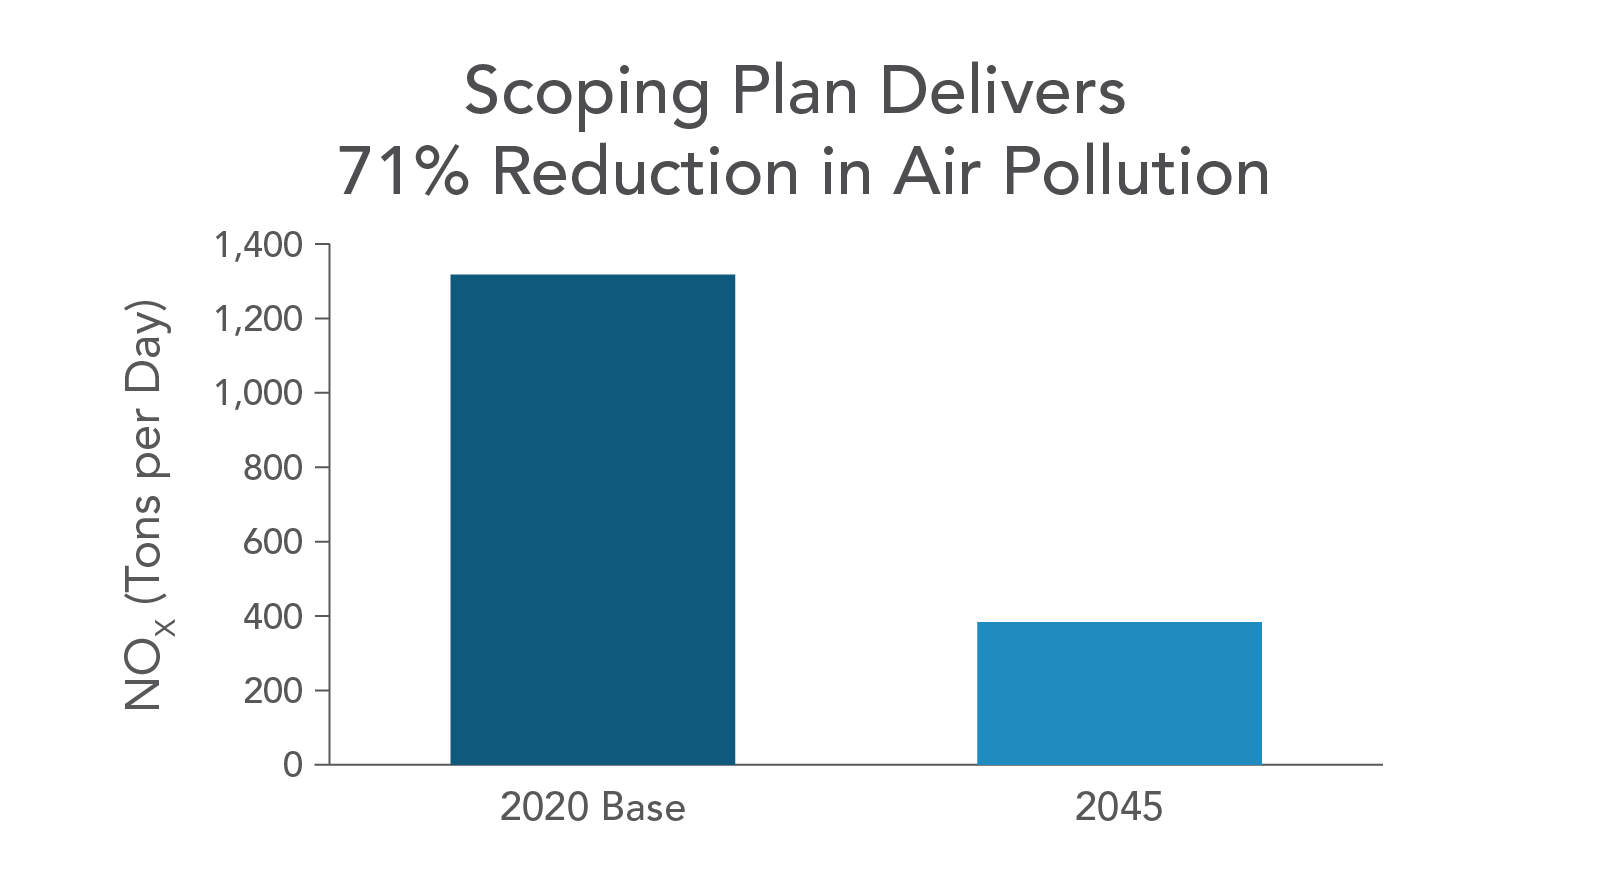 Scoping Plan Deliveres 71% Reduction in Air Pollution - bar graph showing a bar for the 2020 Base between 1,200-14,000 NOx (Tons per day) and the 2045 bar at 400 NOx (Tons per day)